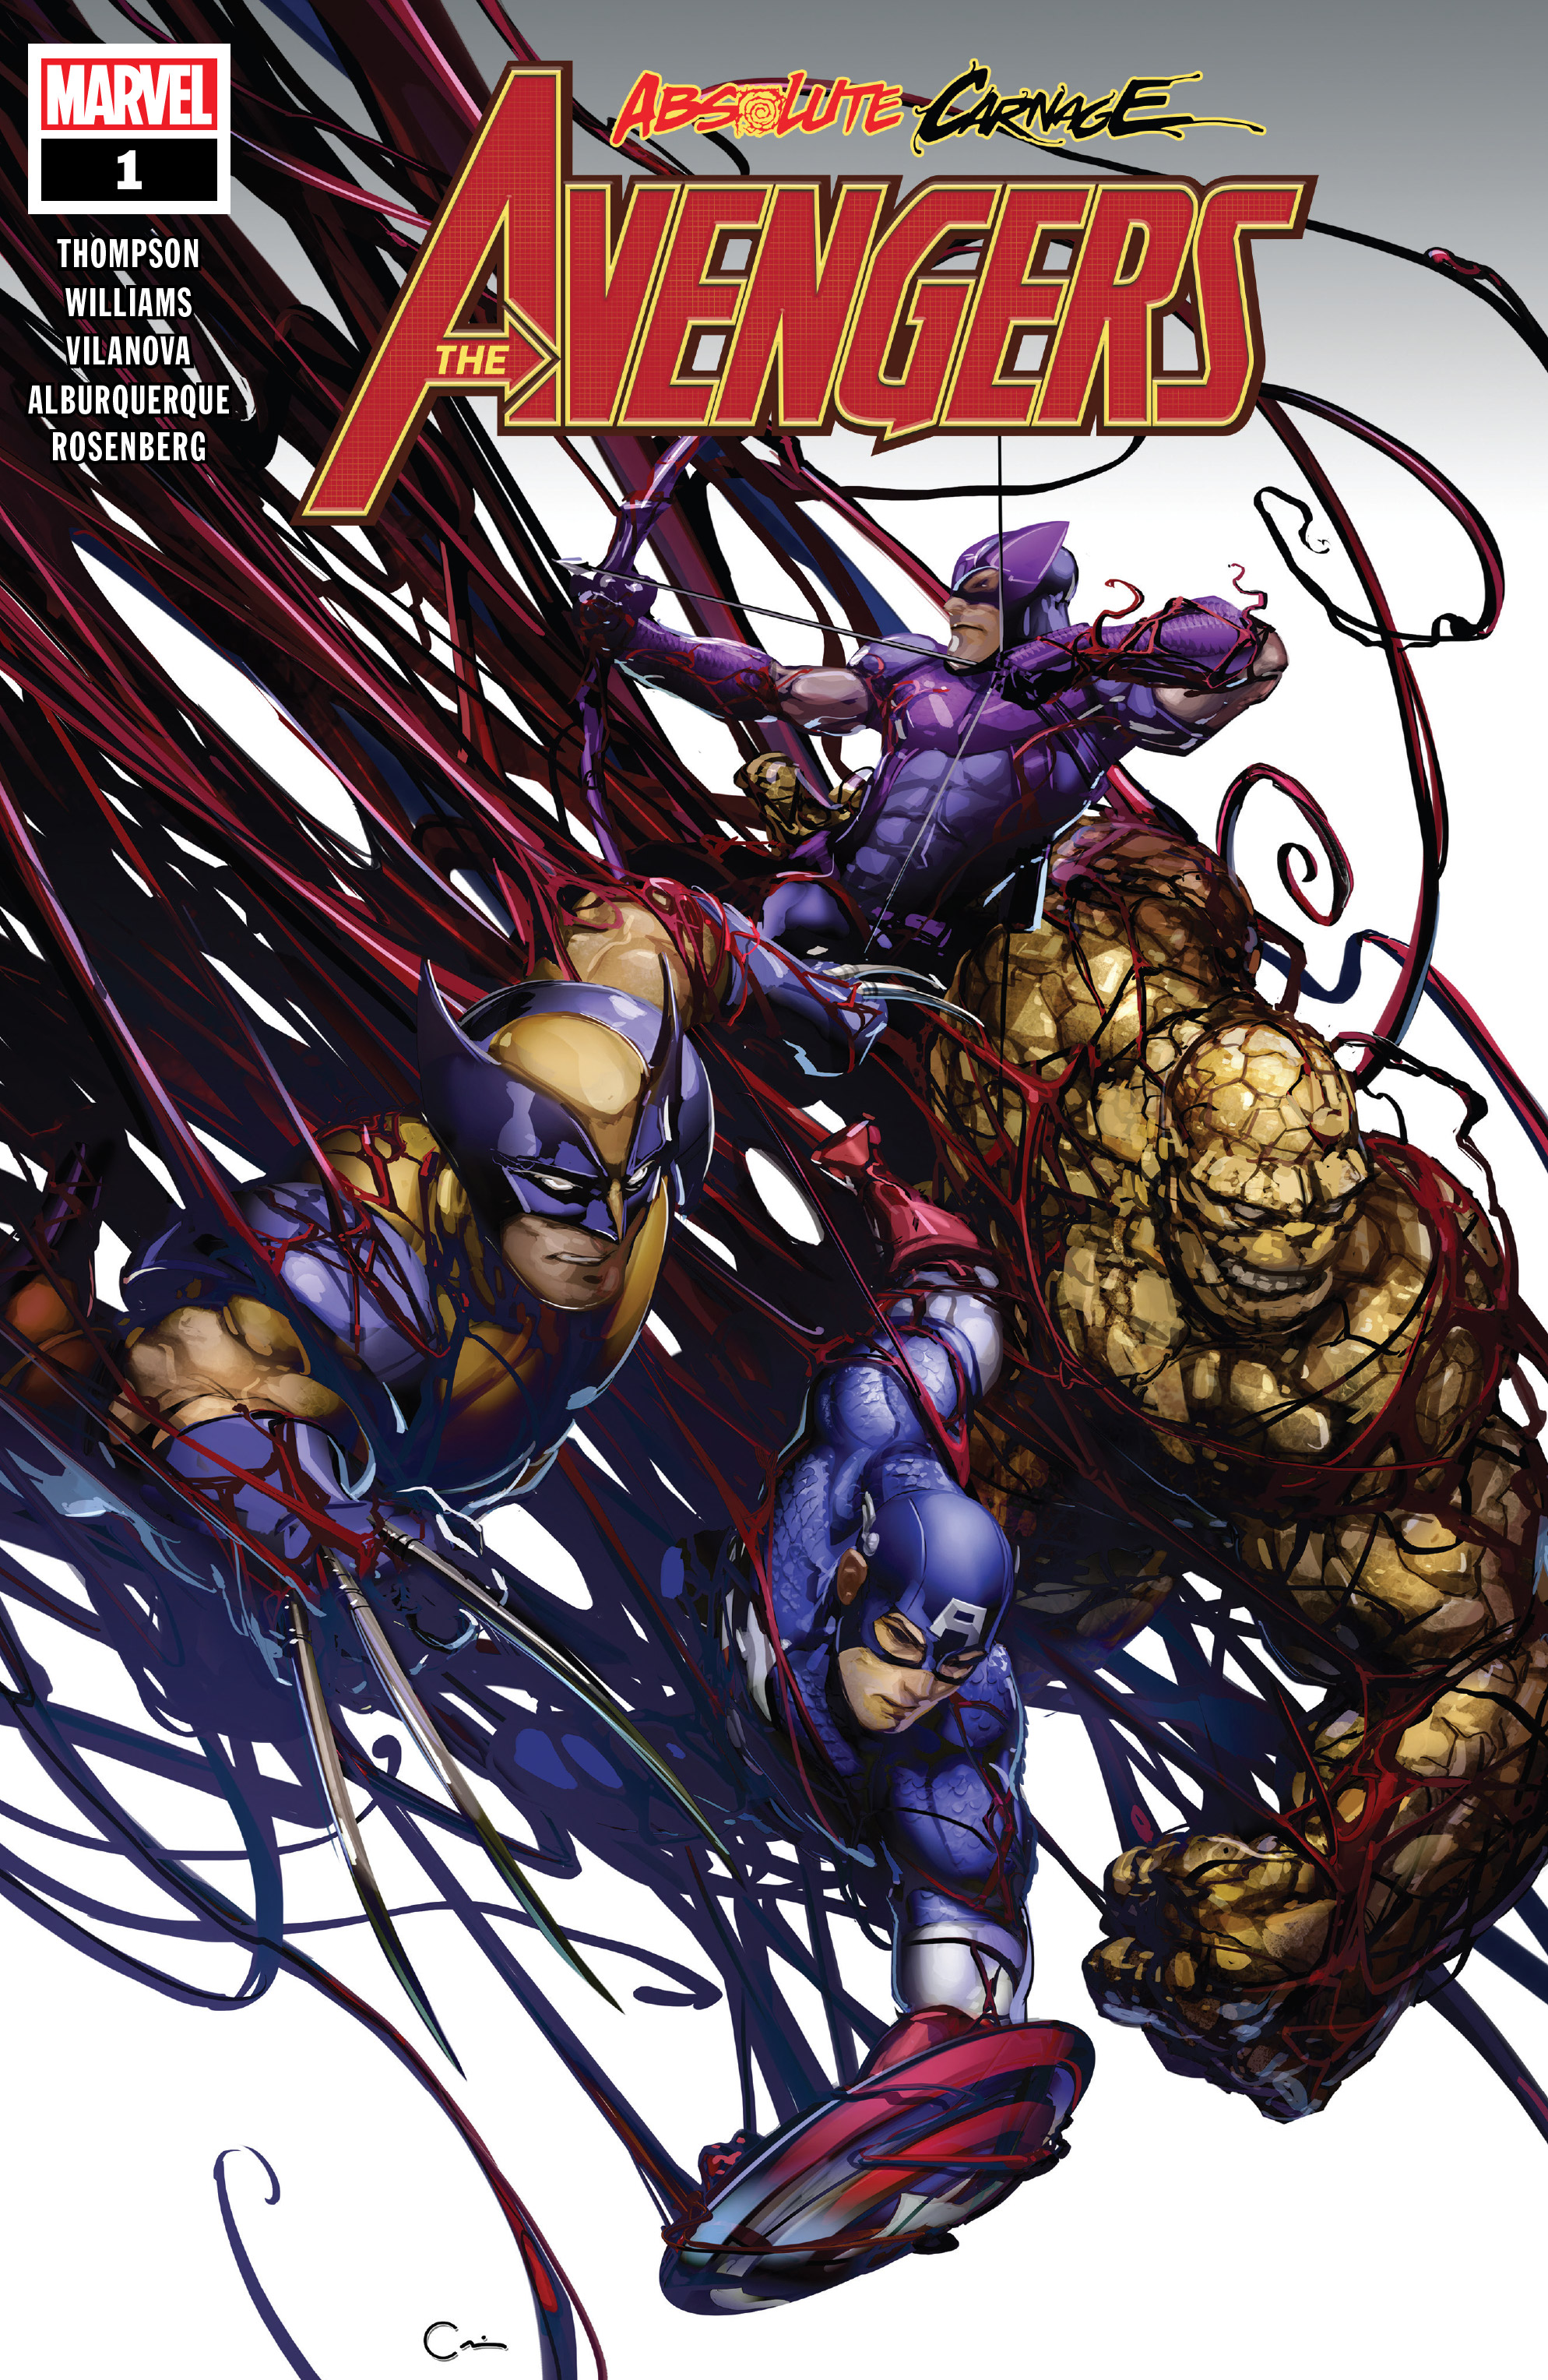 Read online Absolute Carnage: Avengers comic -  Issue # Full - 1